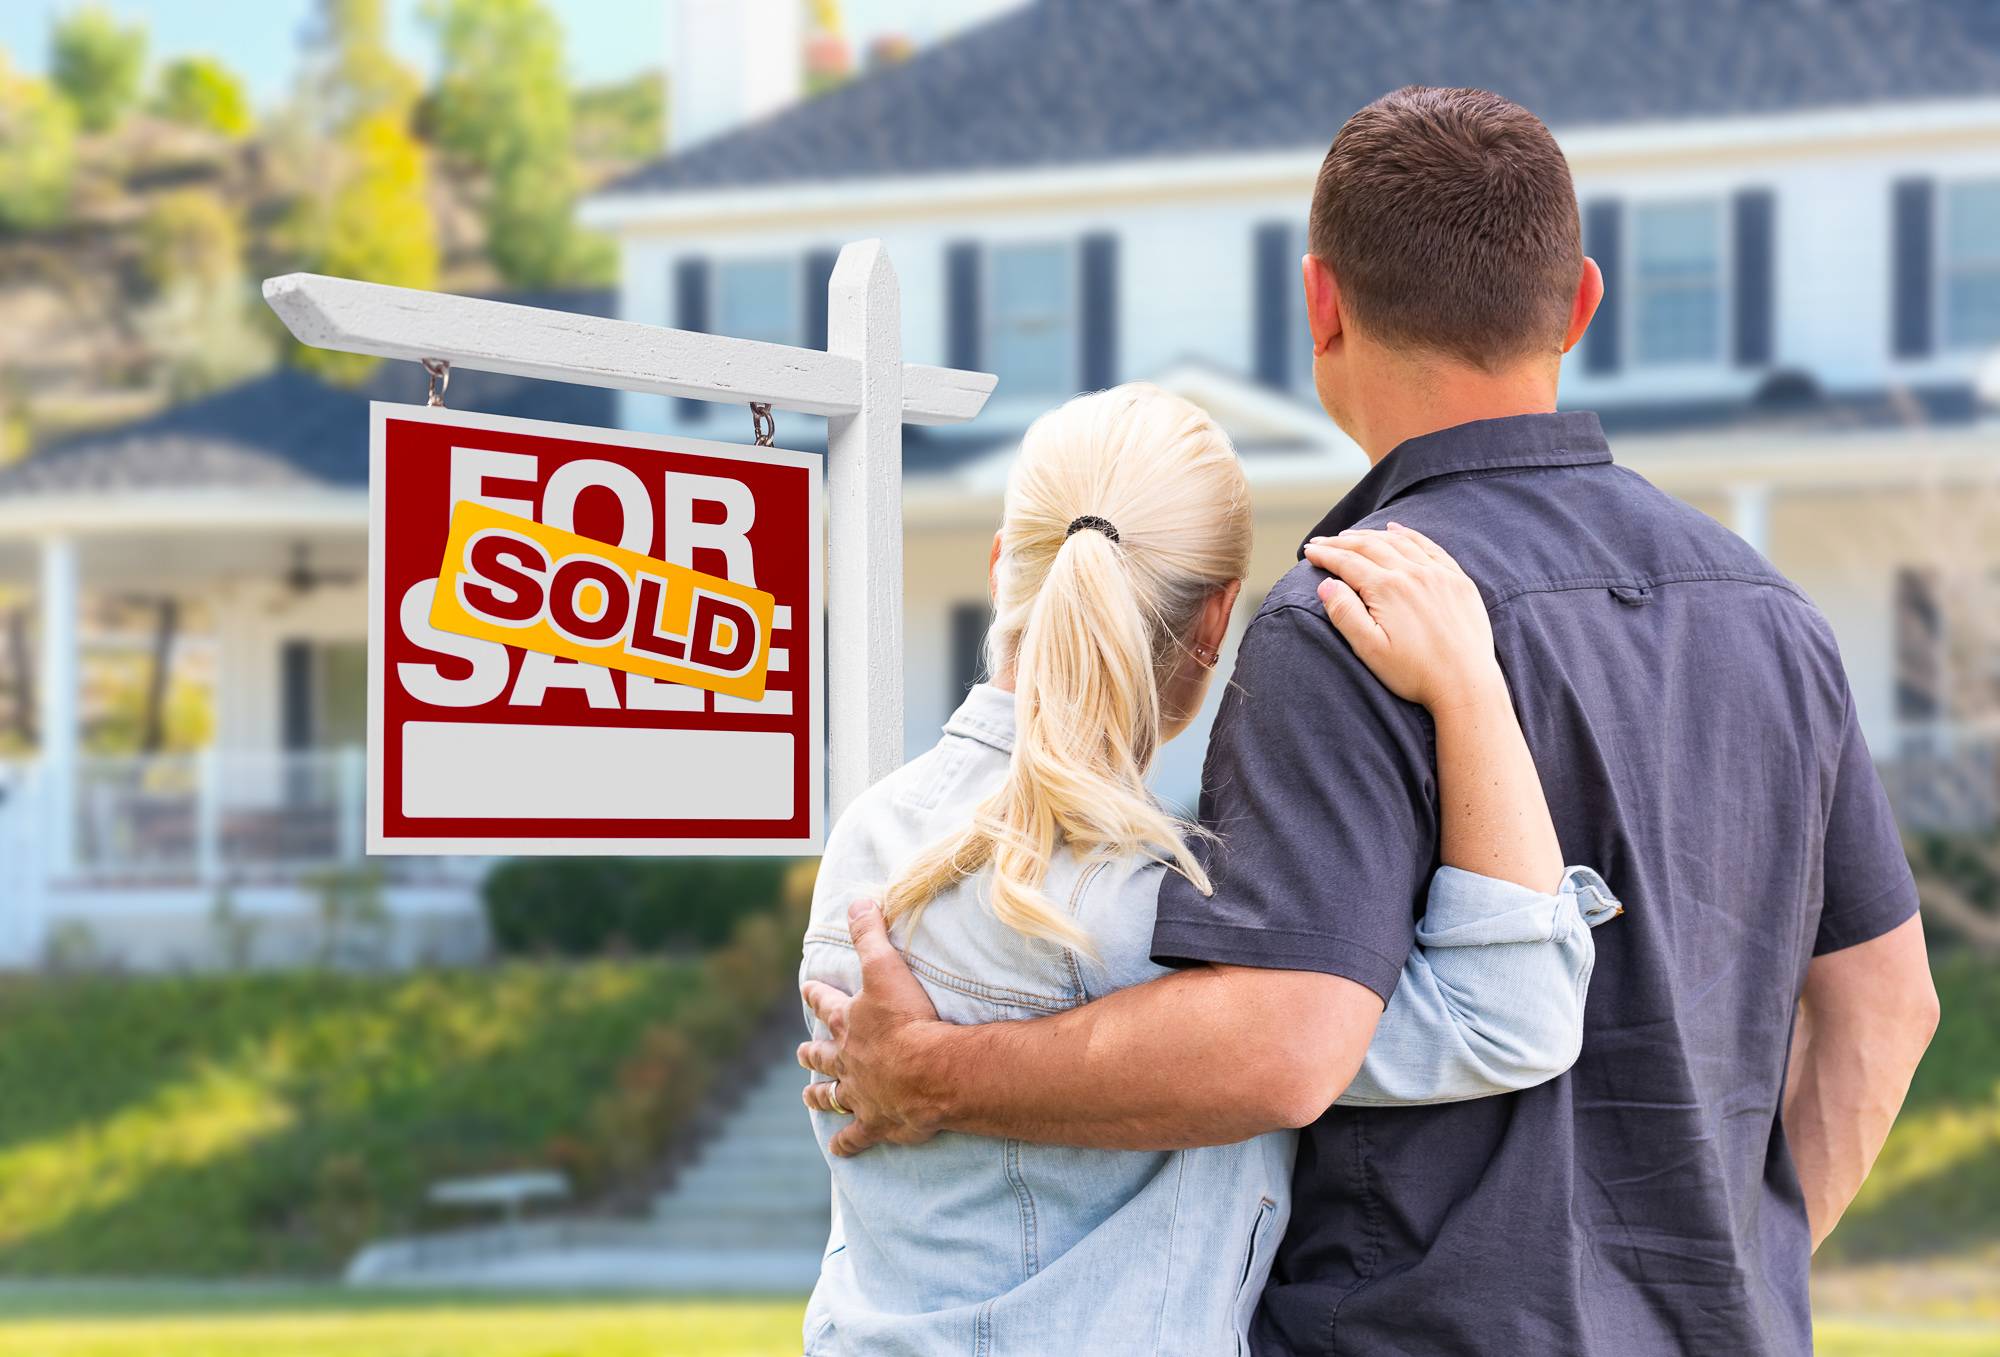 Selling your real estate property in Windermere, Orlando, Winter Garden or Dr.Phillips